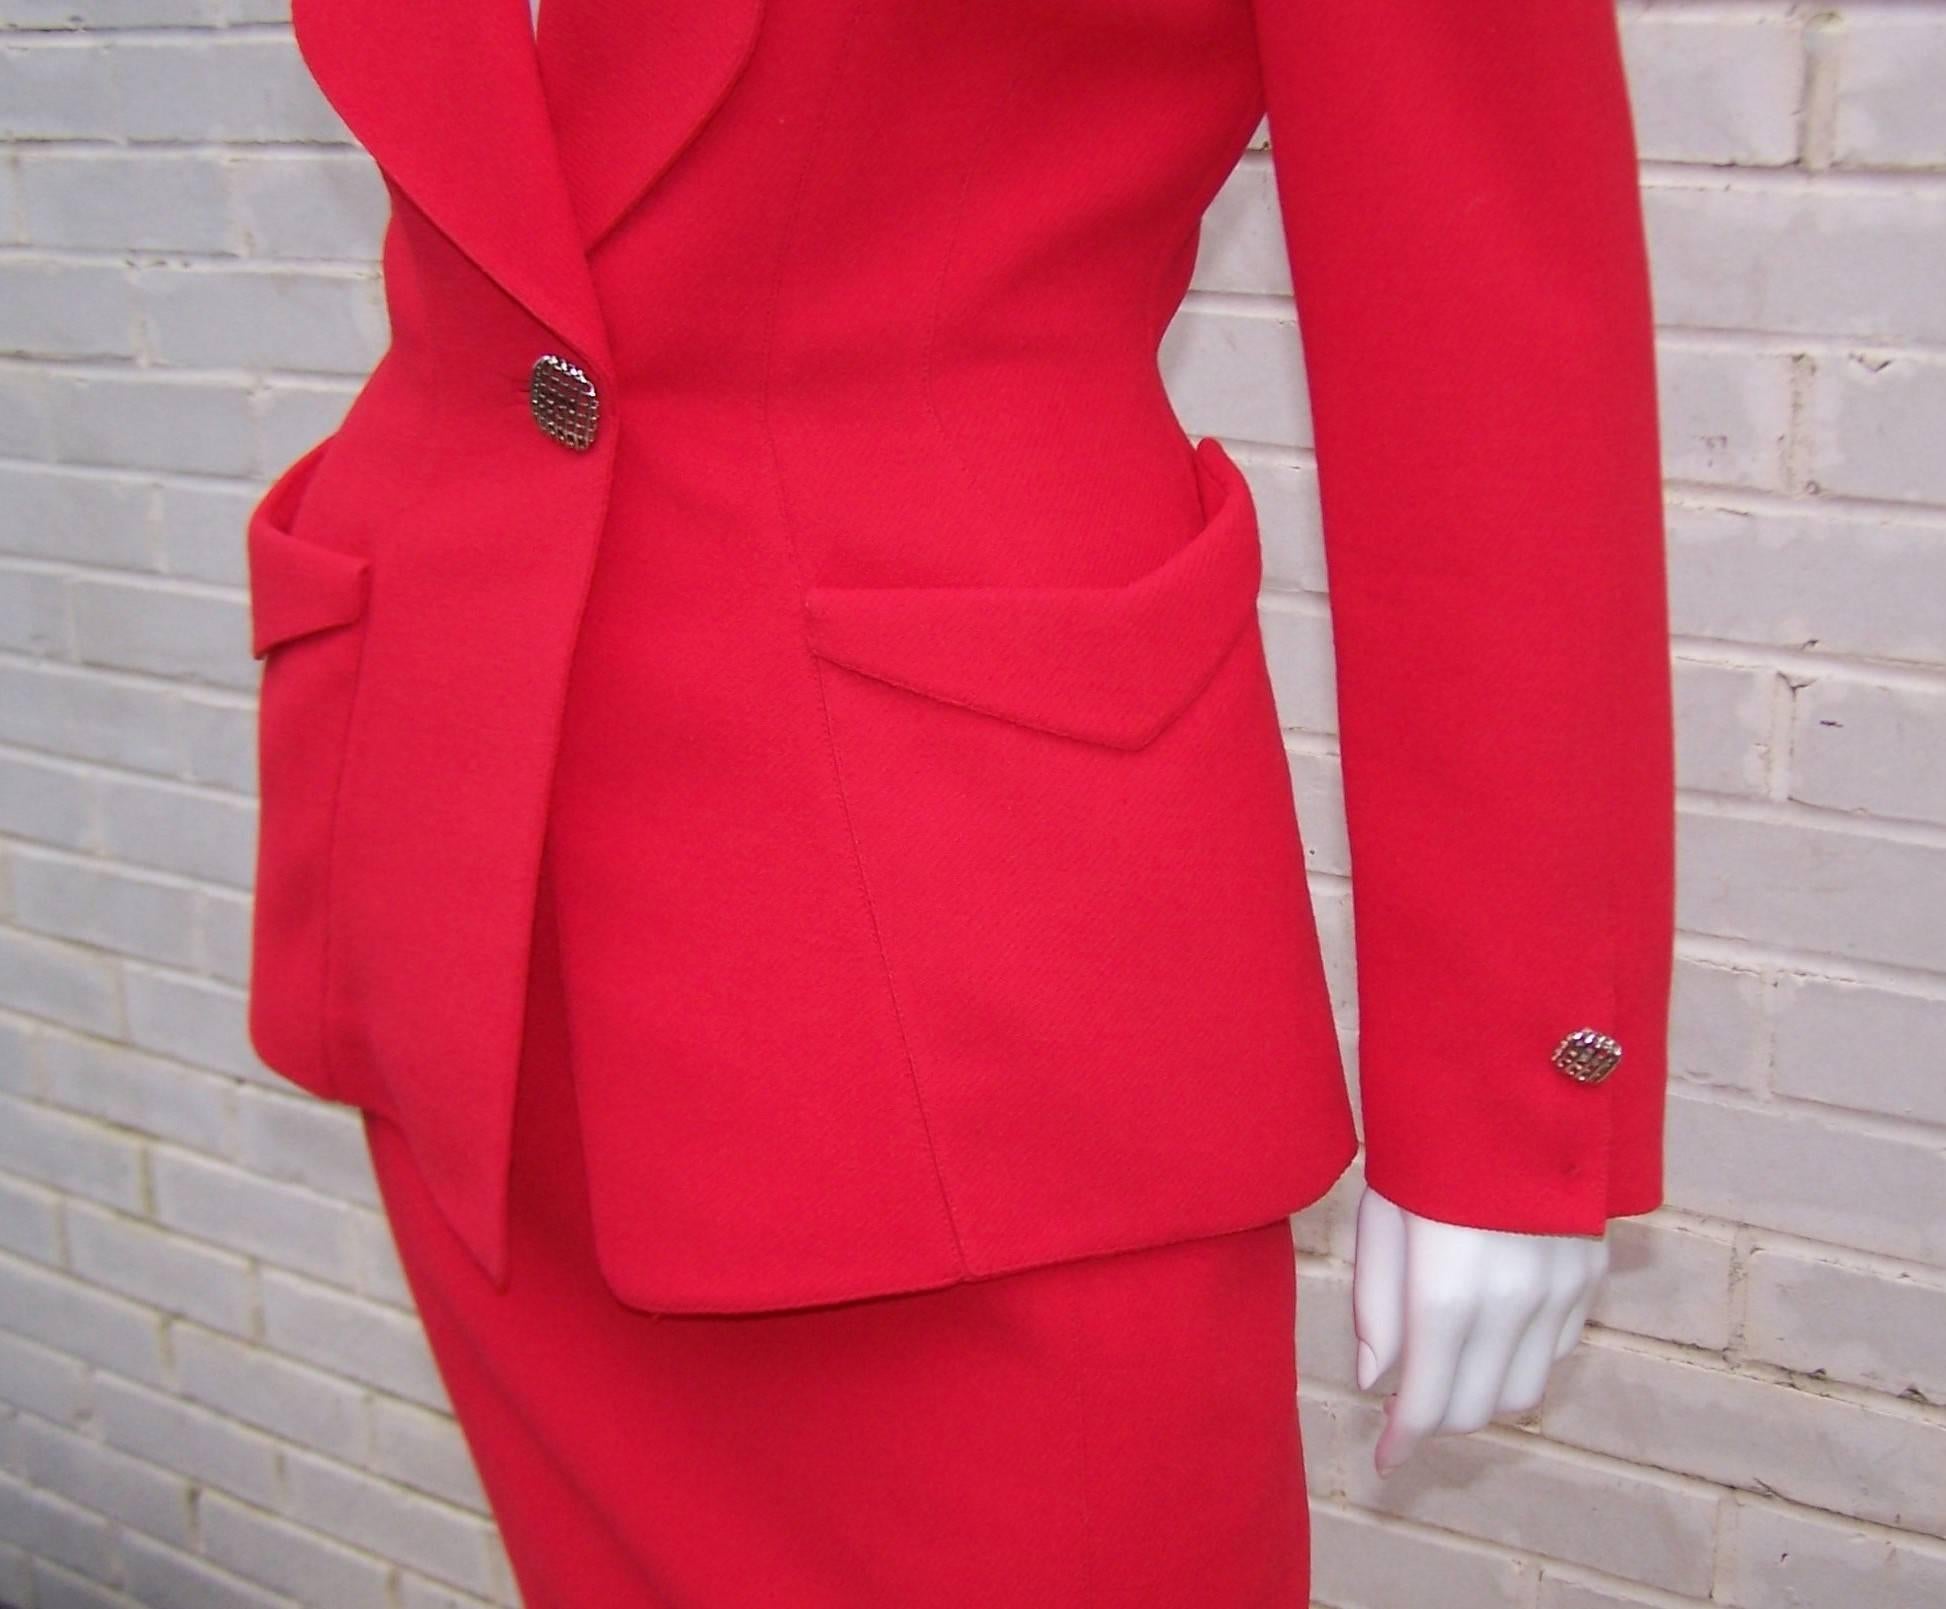 thierry mugler suit